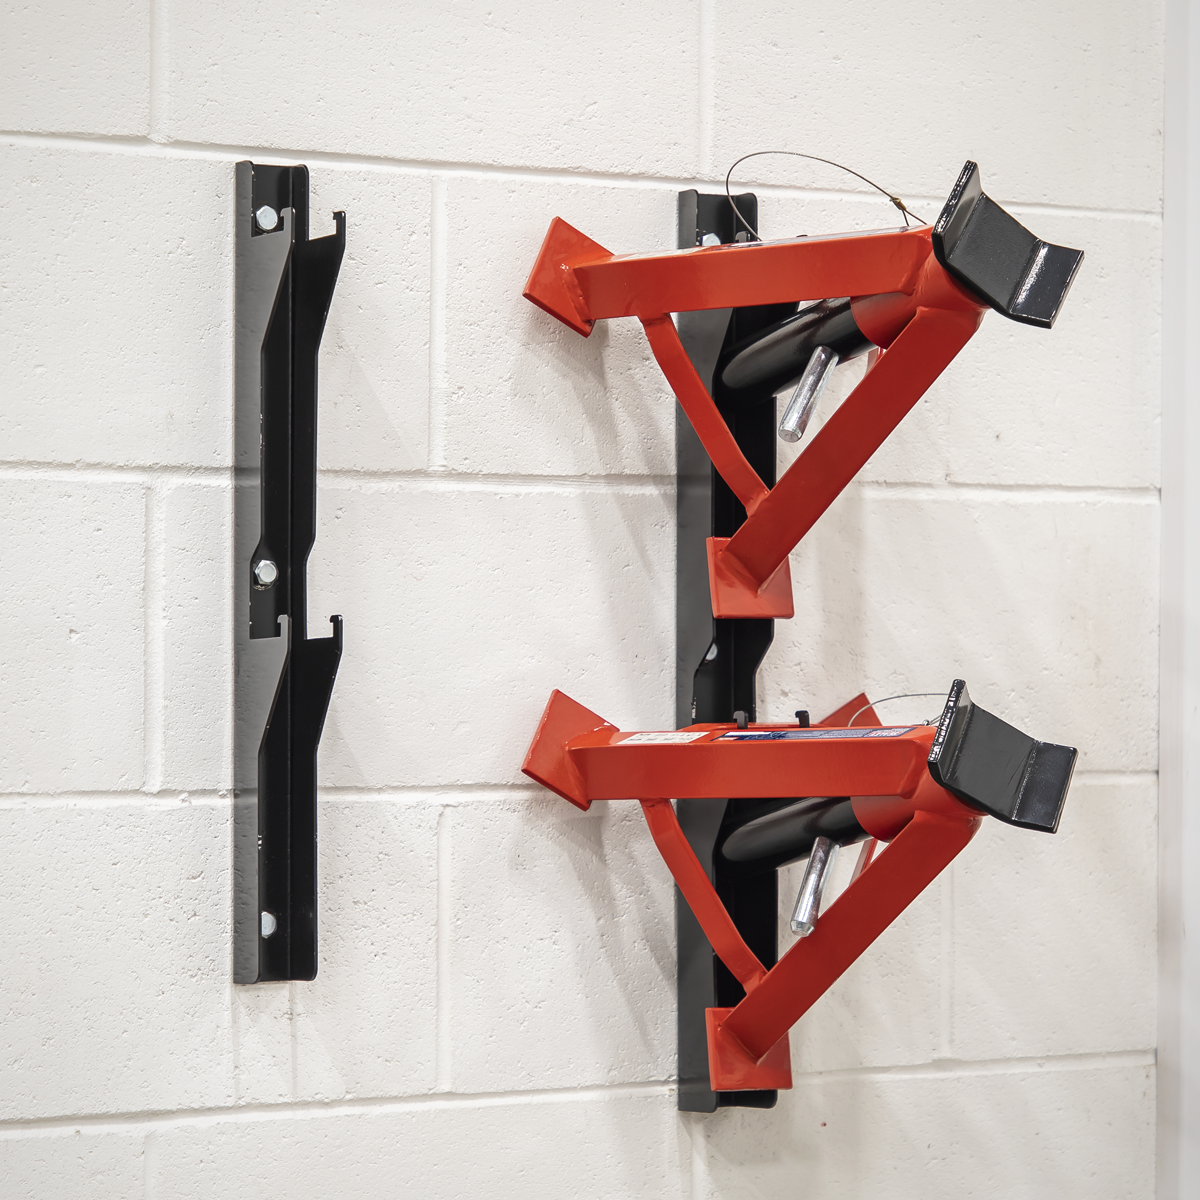 SPACE SAVING - Saves floor/cabinet space by enabling axle stands to be mounted securely to a wall.